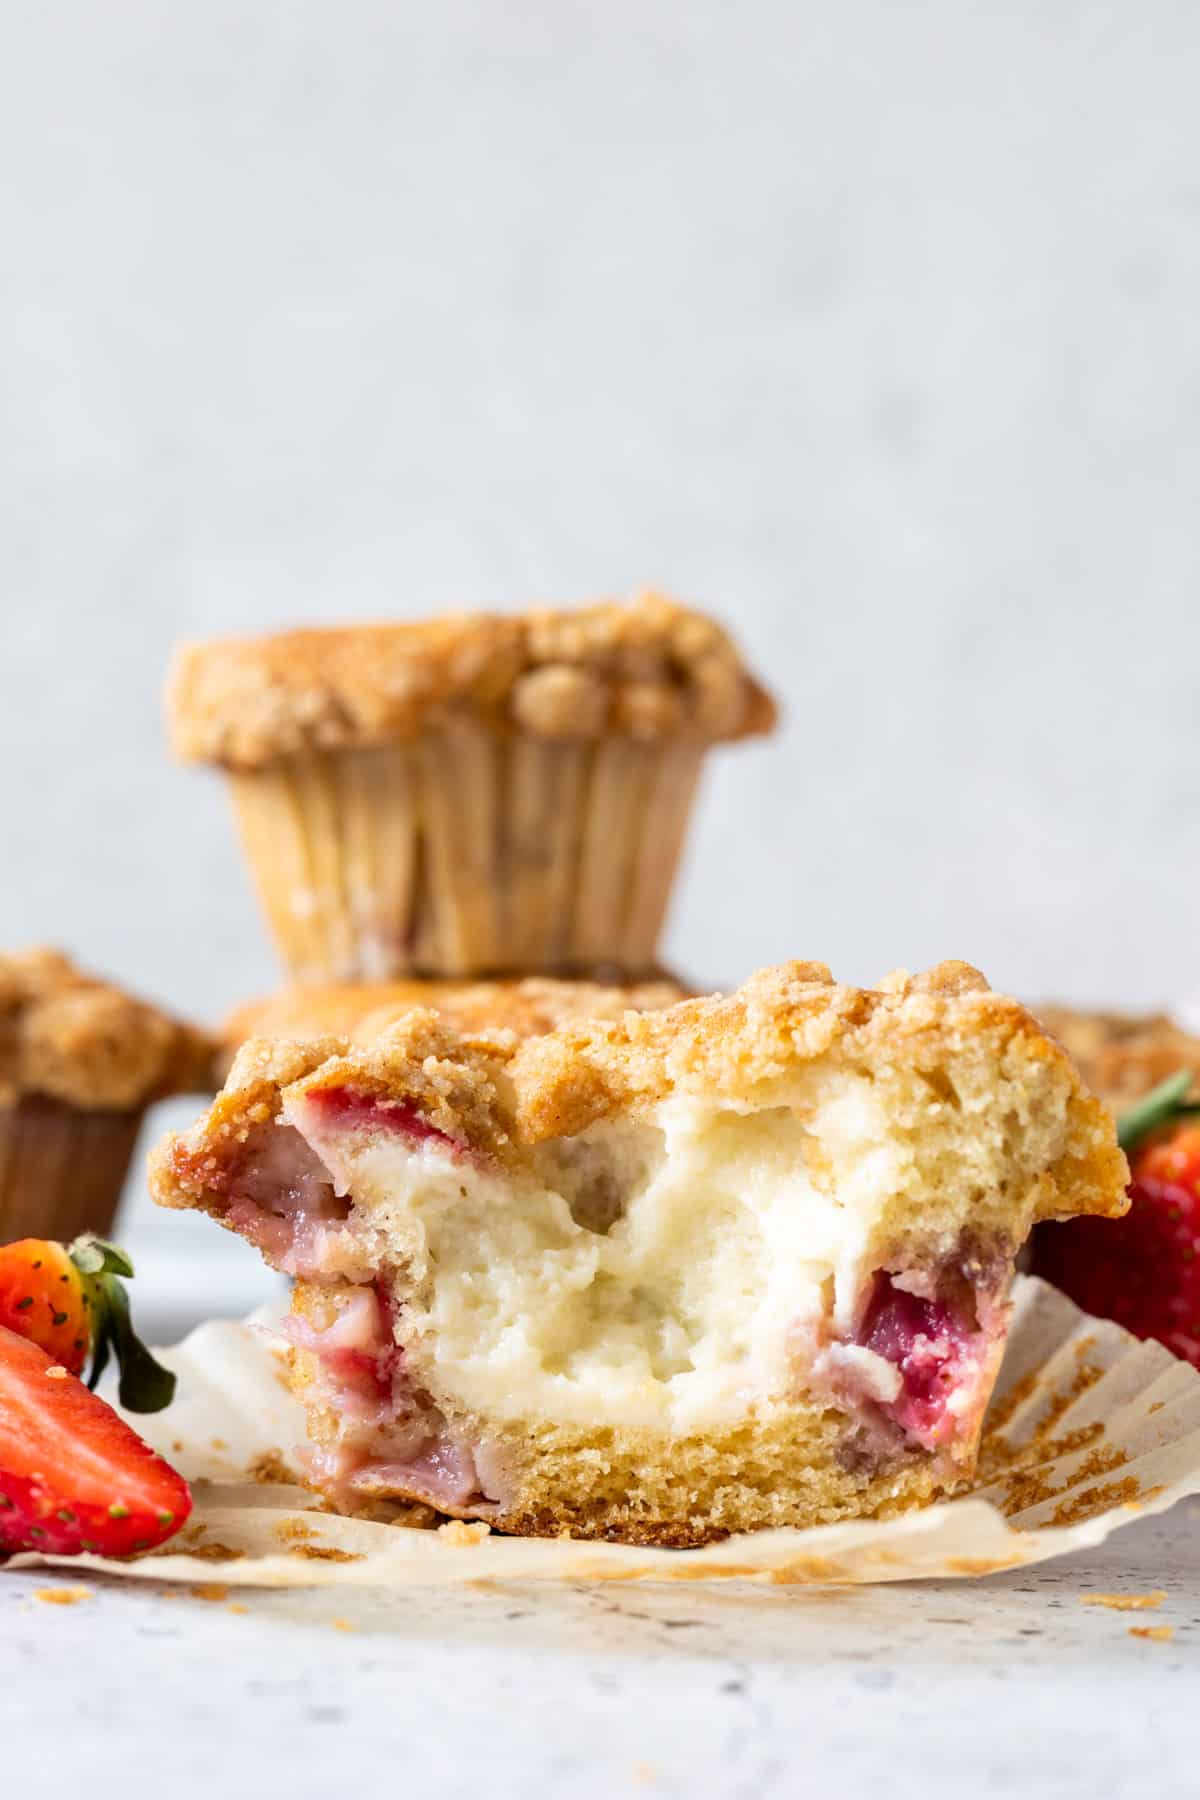 Half of an unwrapped cream cheese-filled strawberry muffin.